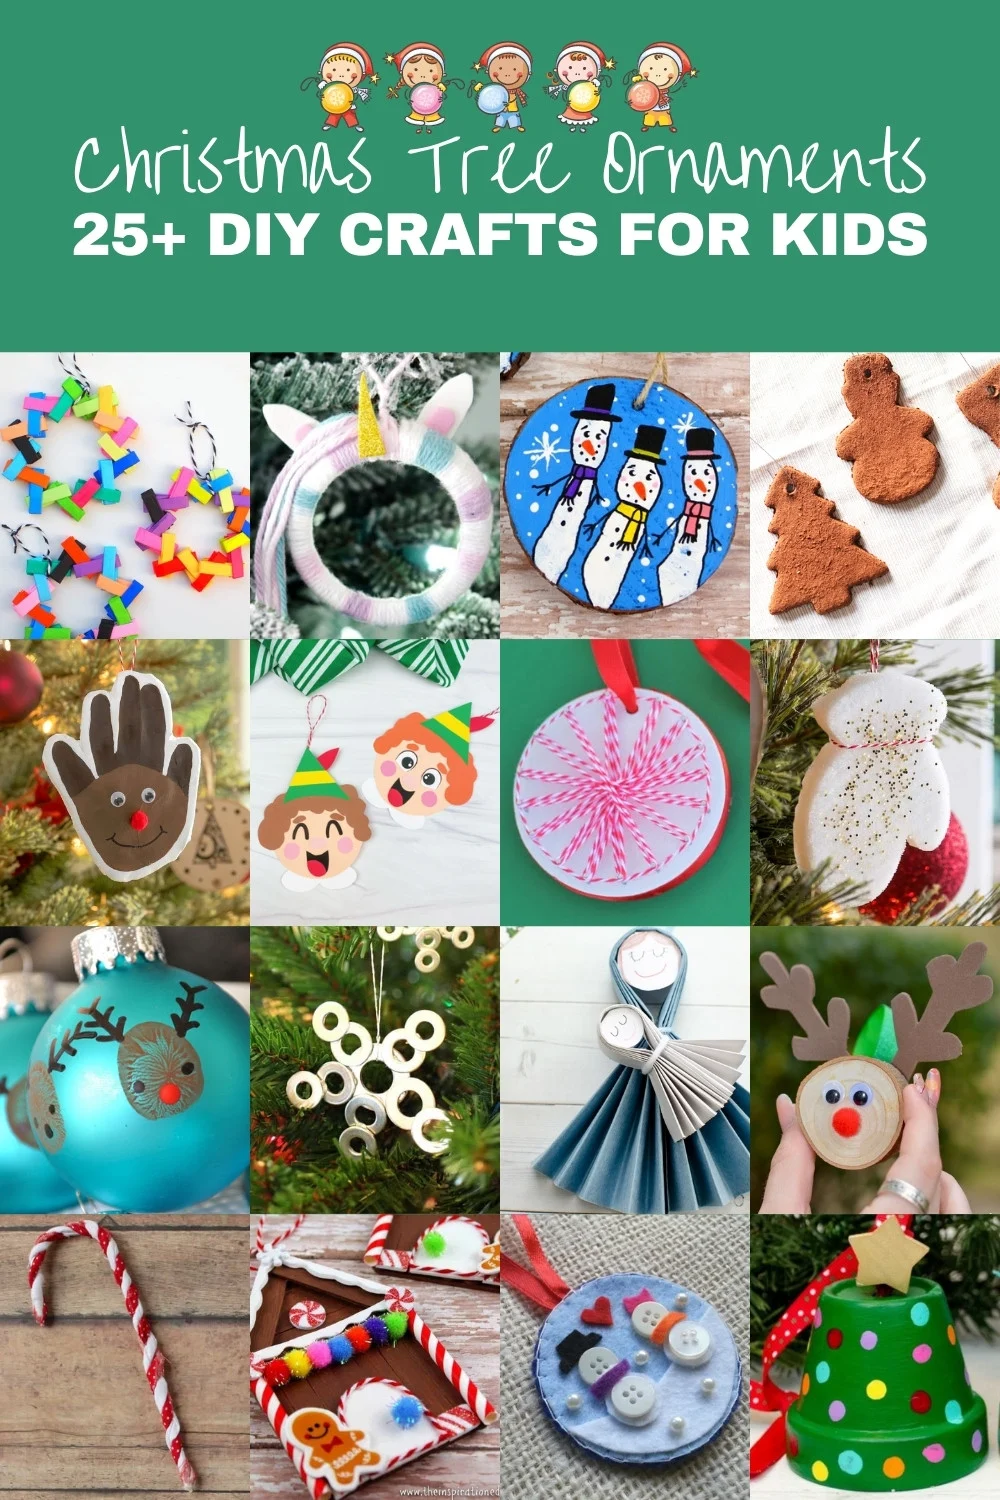 75+ Activities and Crafts for Teens & Tweens That Won't Get Eye